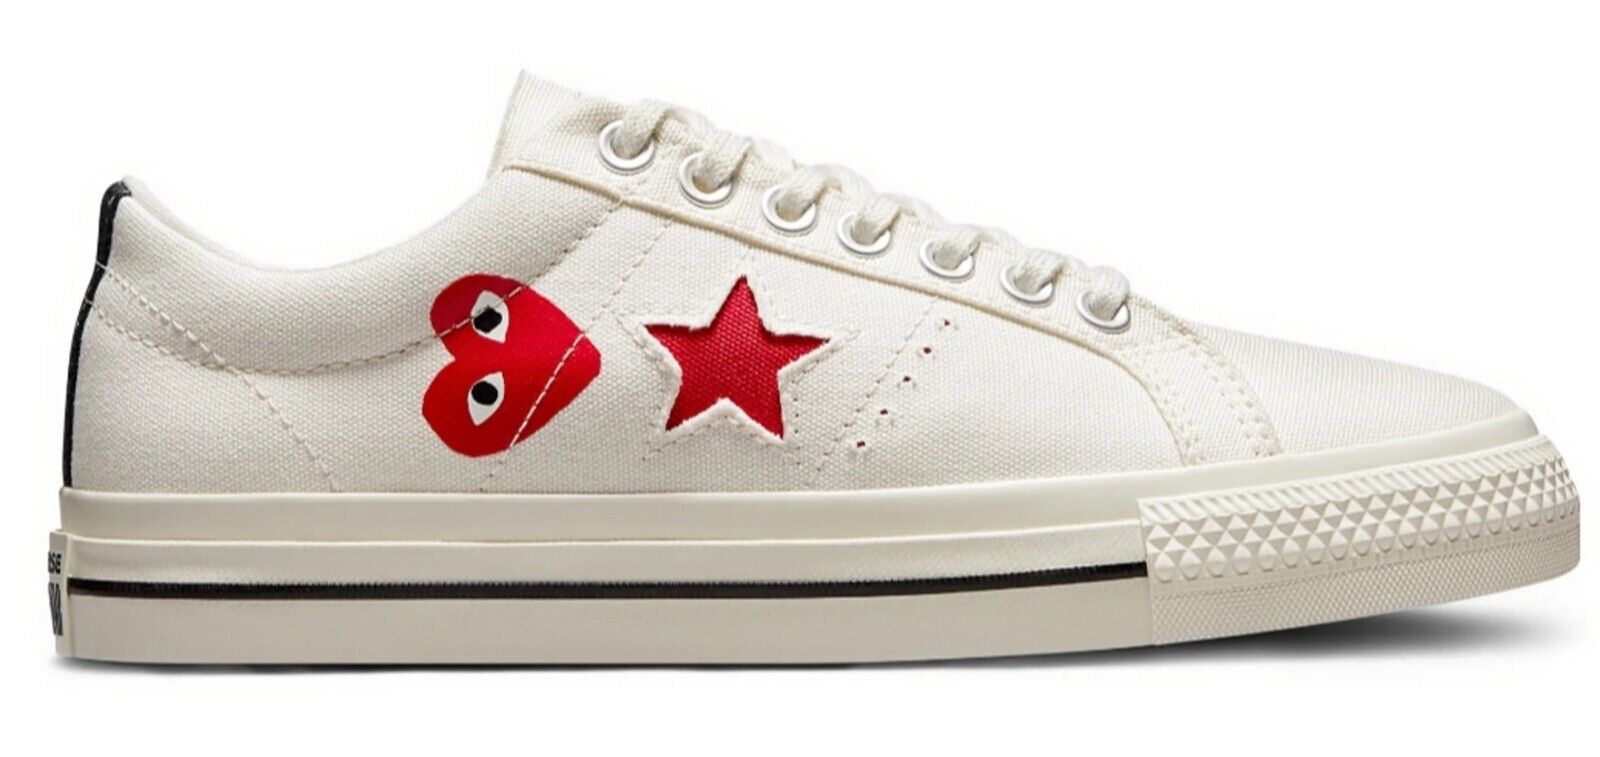 CONVERSE x COMME DES GARÇONS PLAY RED One Star Shoes 3-12 | eBay